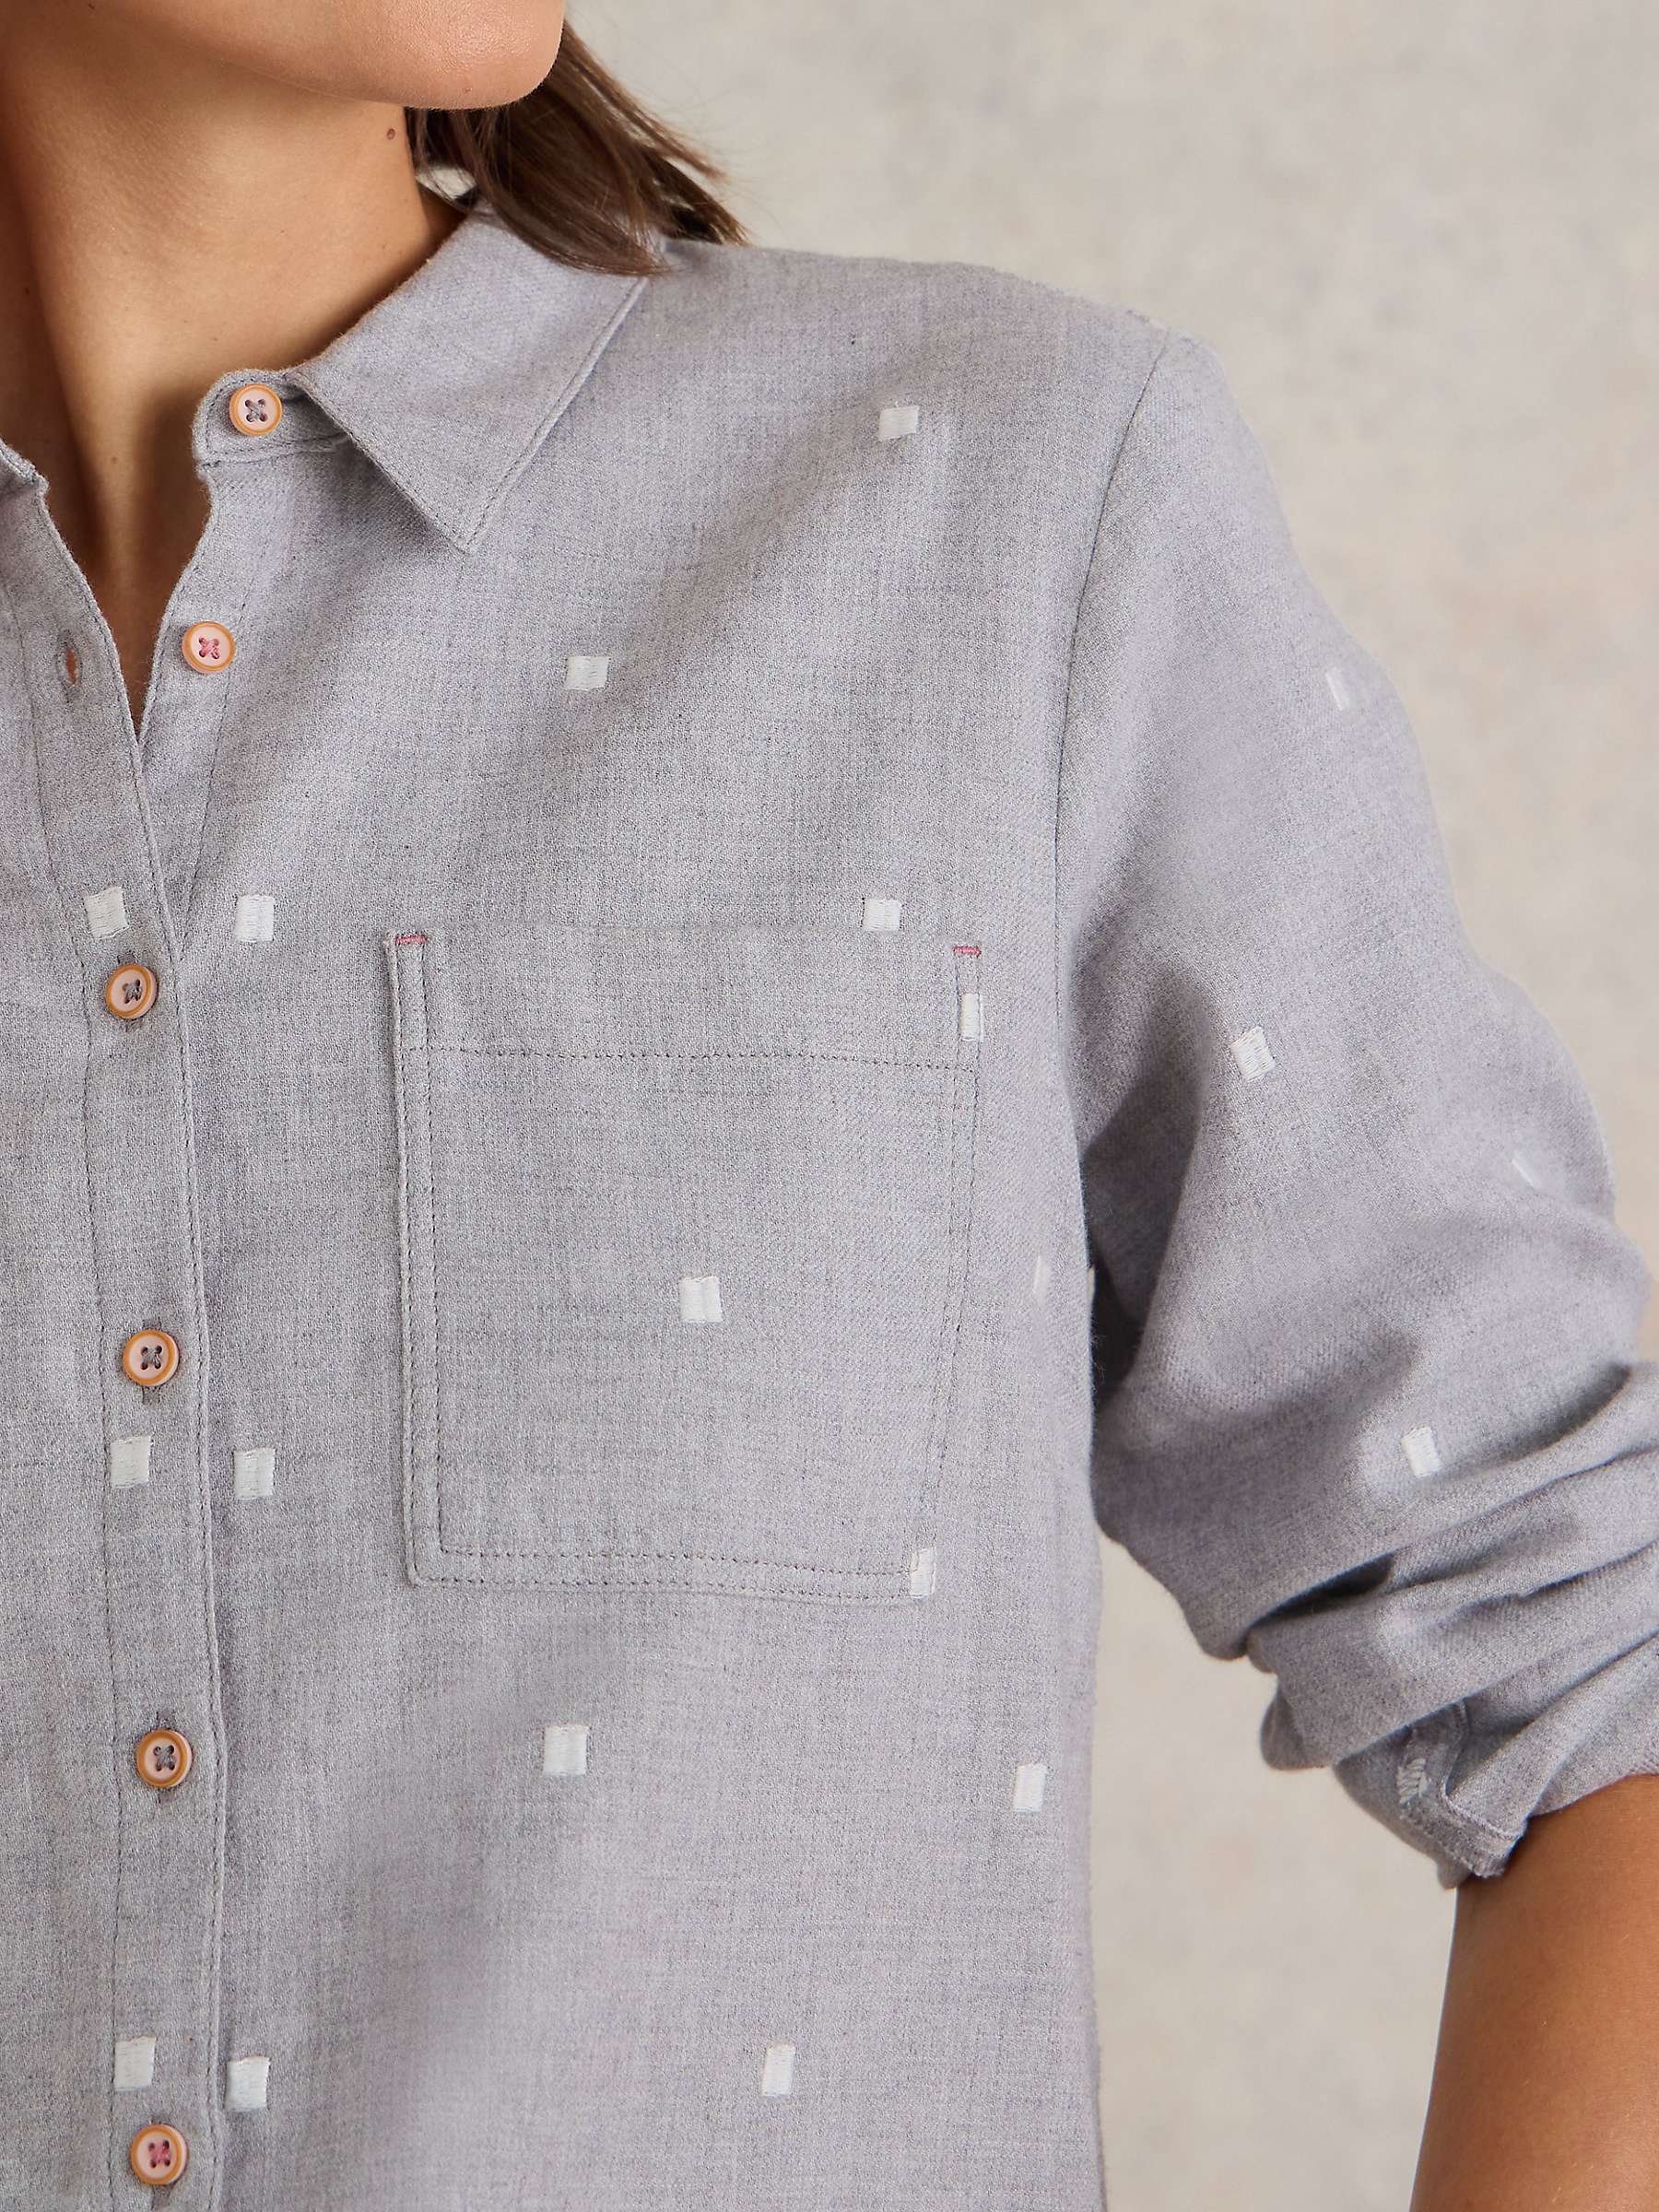 Buy White Stuff Square Embroidery Organic Cotton Shirt, Grey/White Online at johnlewis.com